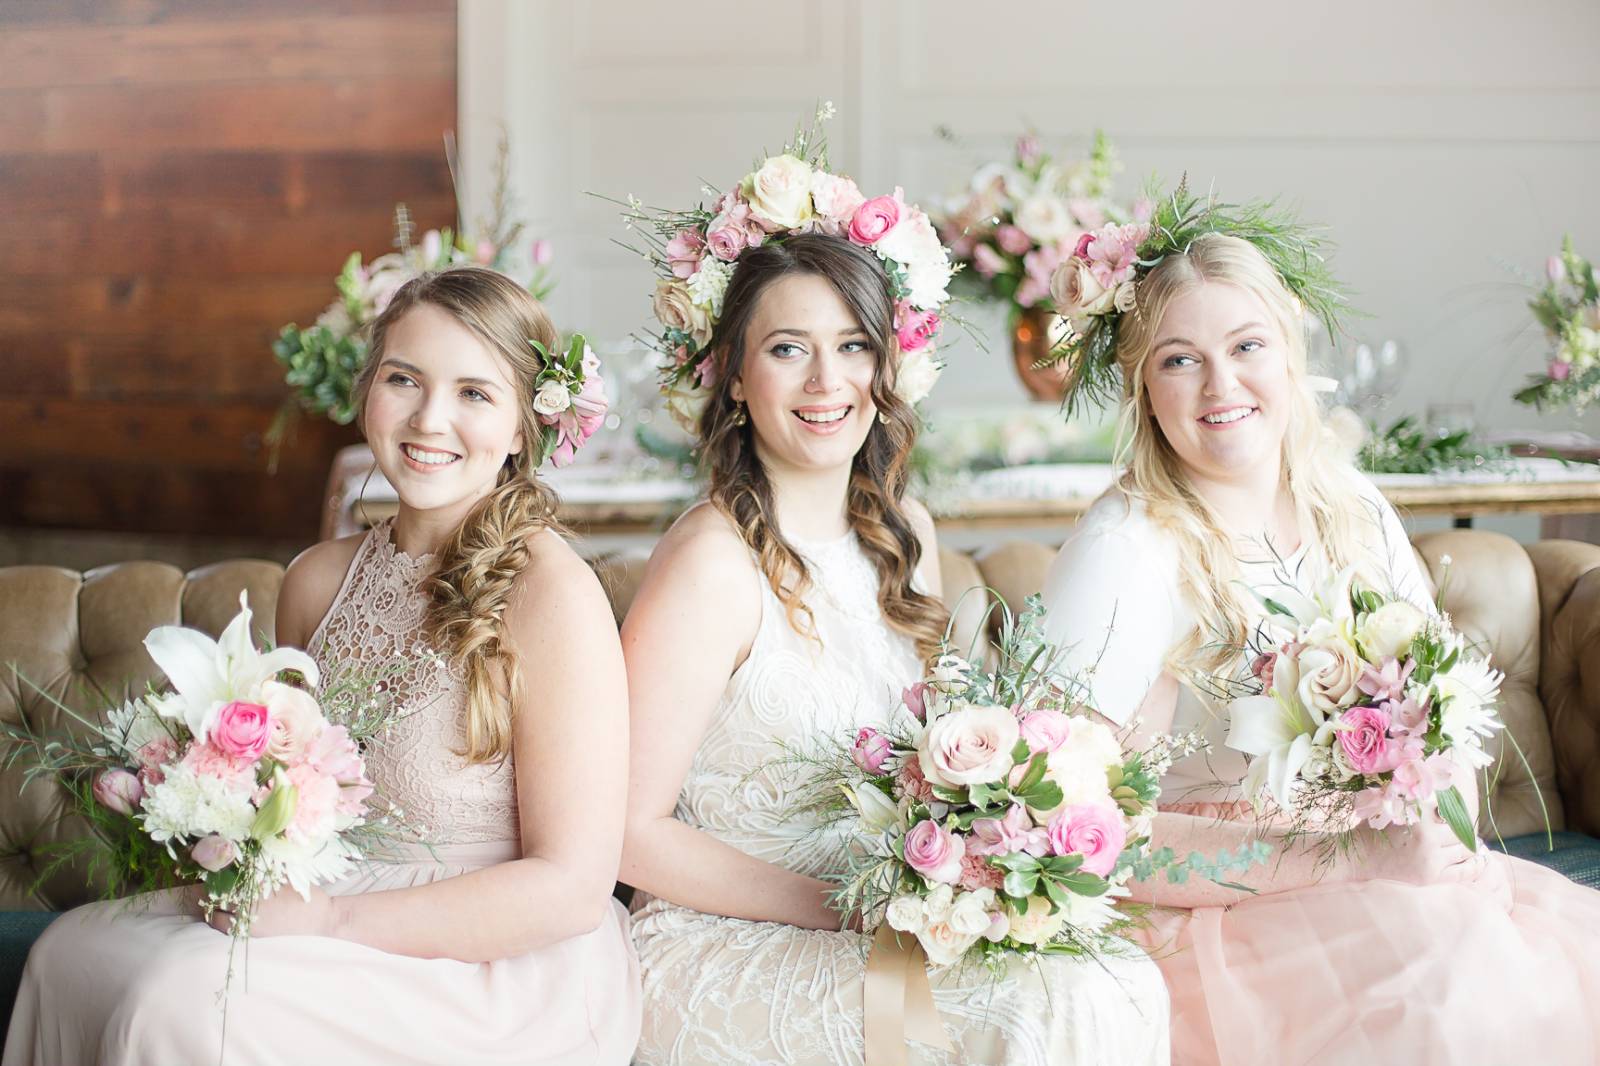 Neutral colored bridesmaids with flower crowns